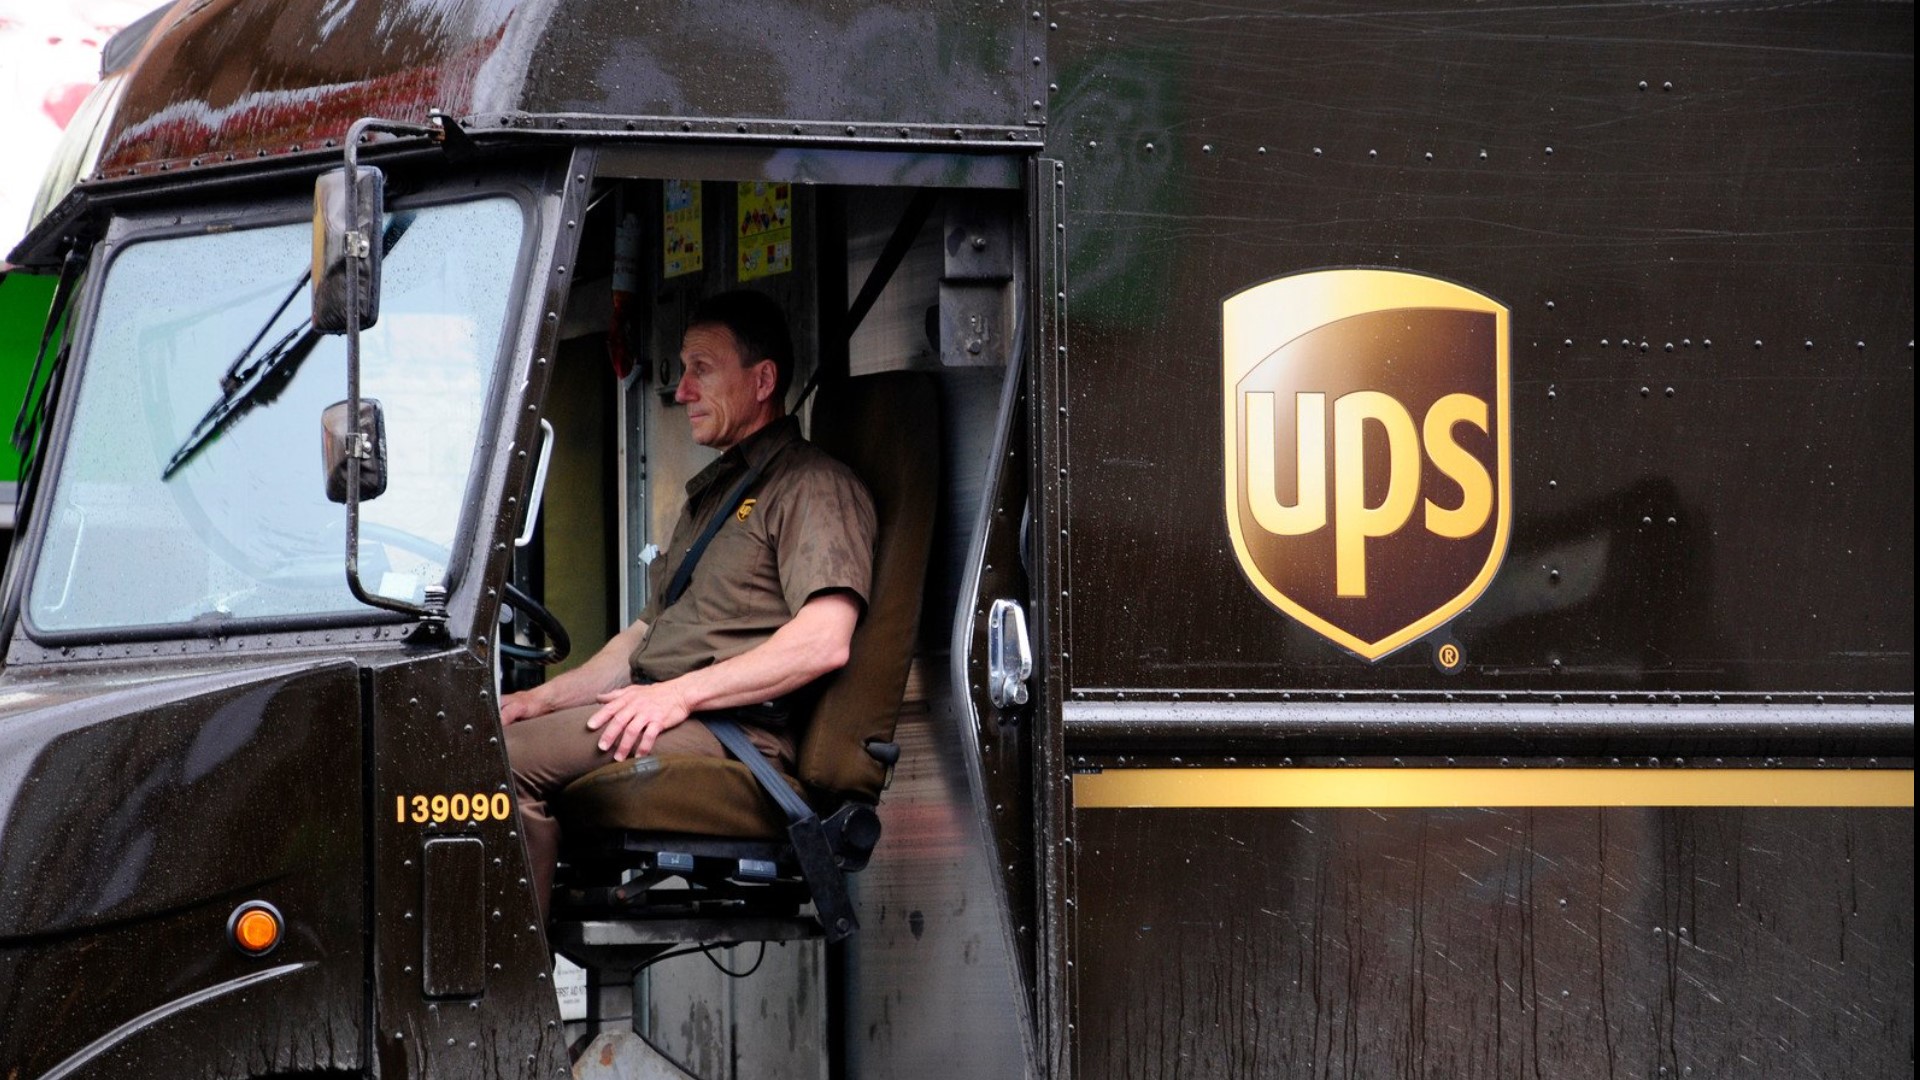 FOX43's Tyler Hatfield spent the day with a local UPS driver to get an inside look at the job.